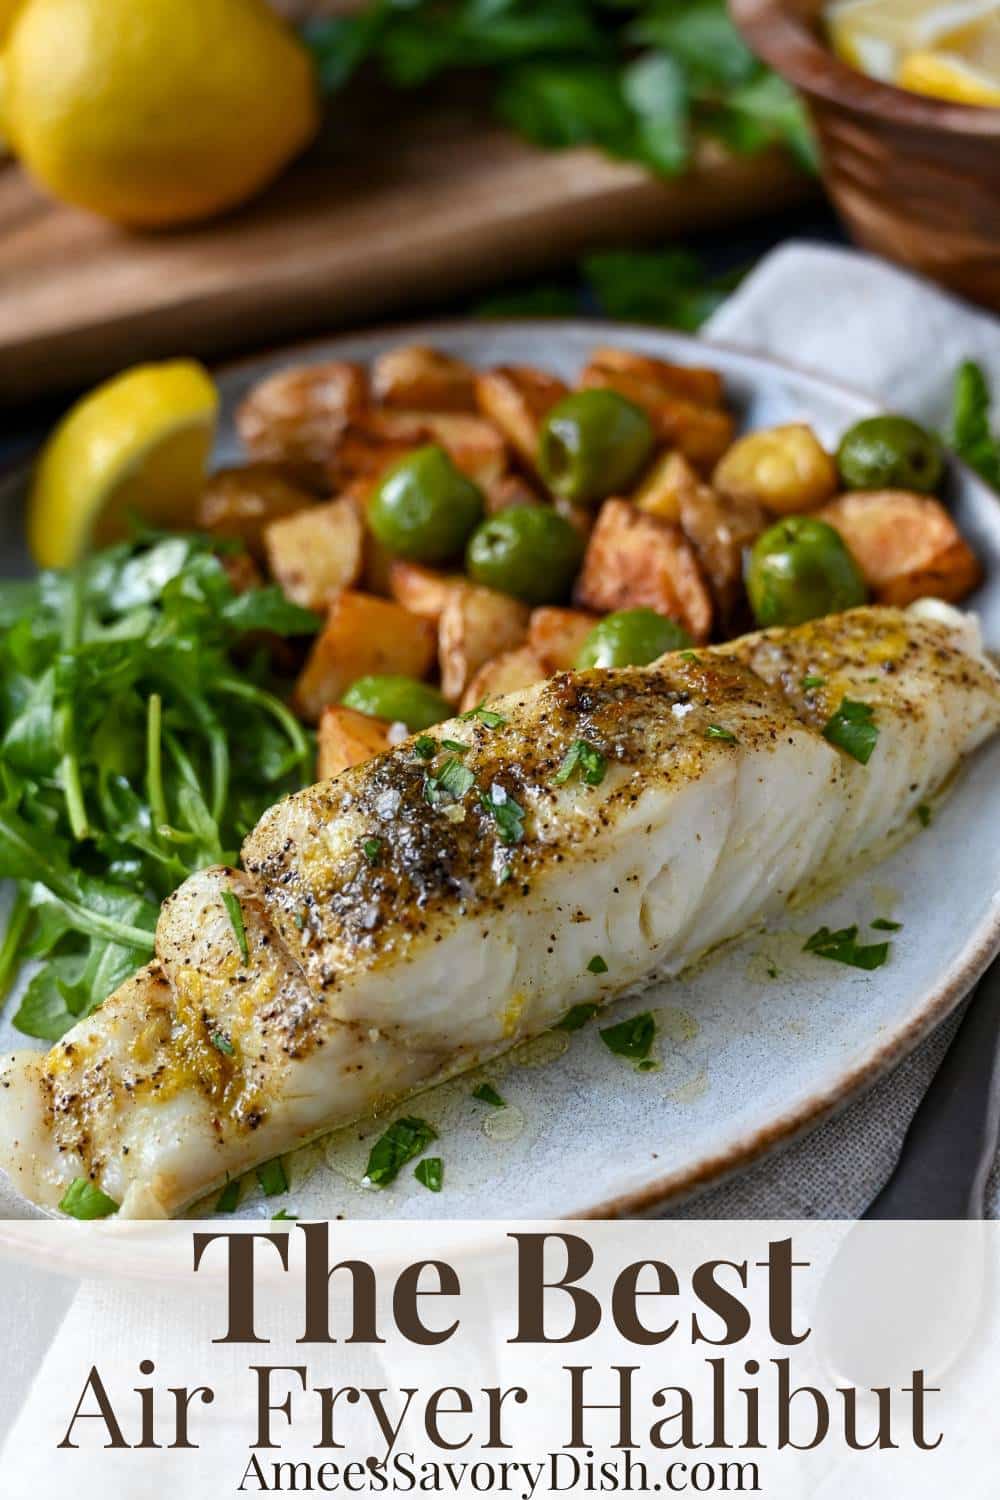 This quick and easy air fryer recipe transforms the mild-flavored, delicate fish into a Greek-inspired masterpiece! via @Ameessavorydish